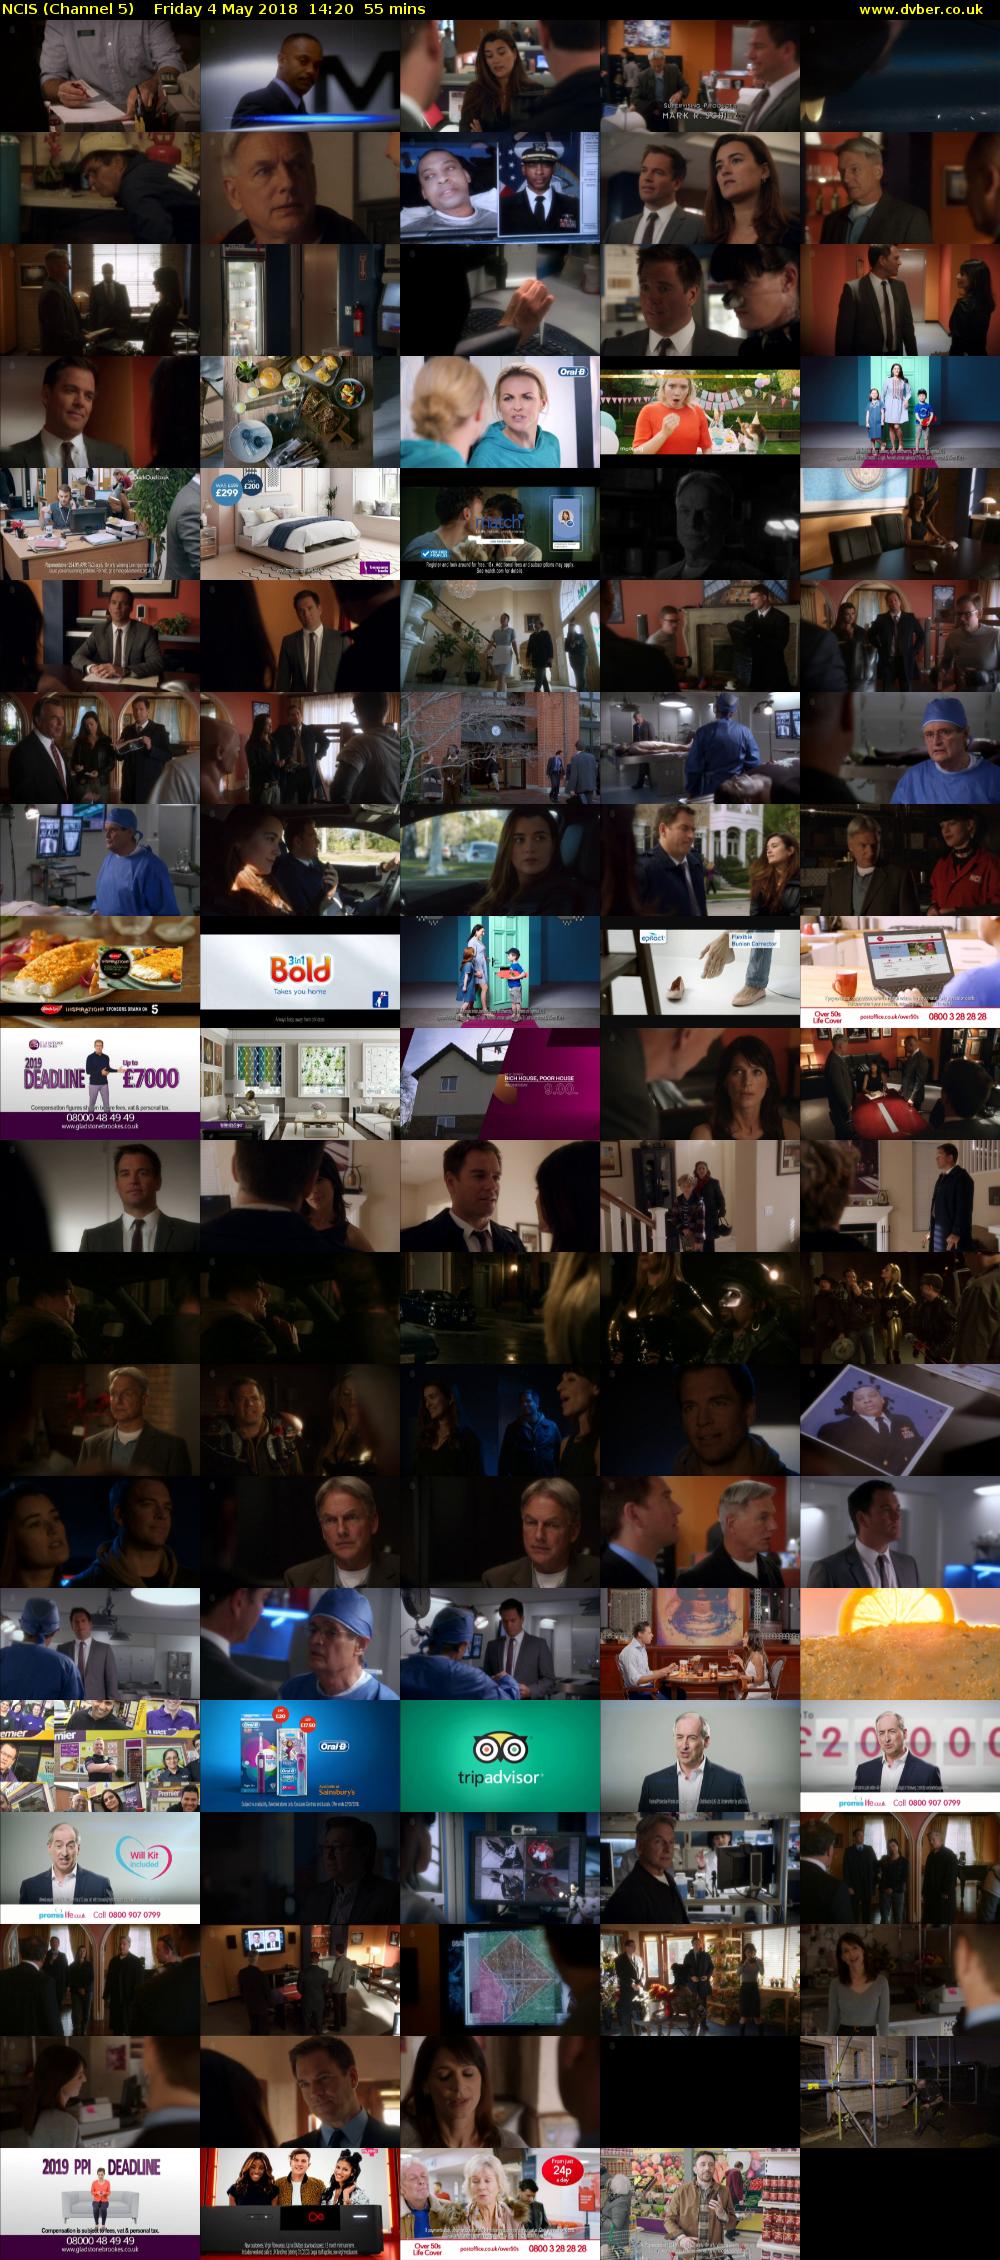 NCIS (Channel 5) Friday 4 May 2018 14:20 - 15:15